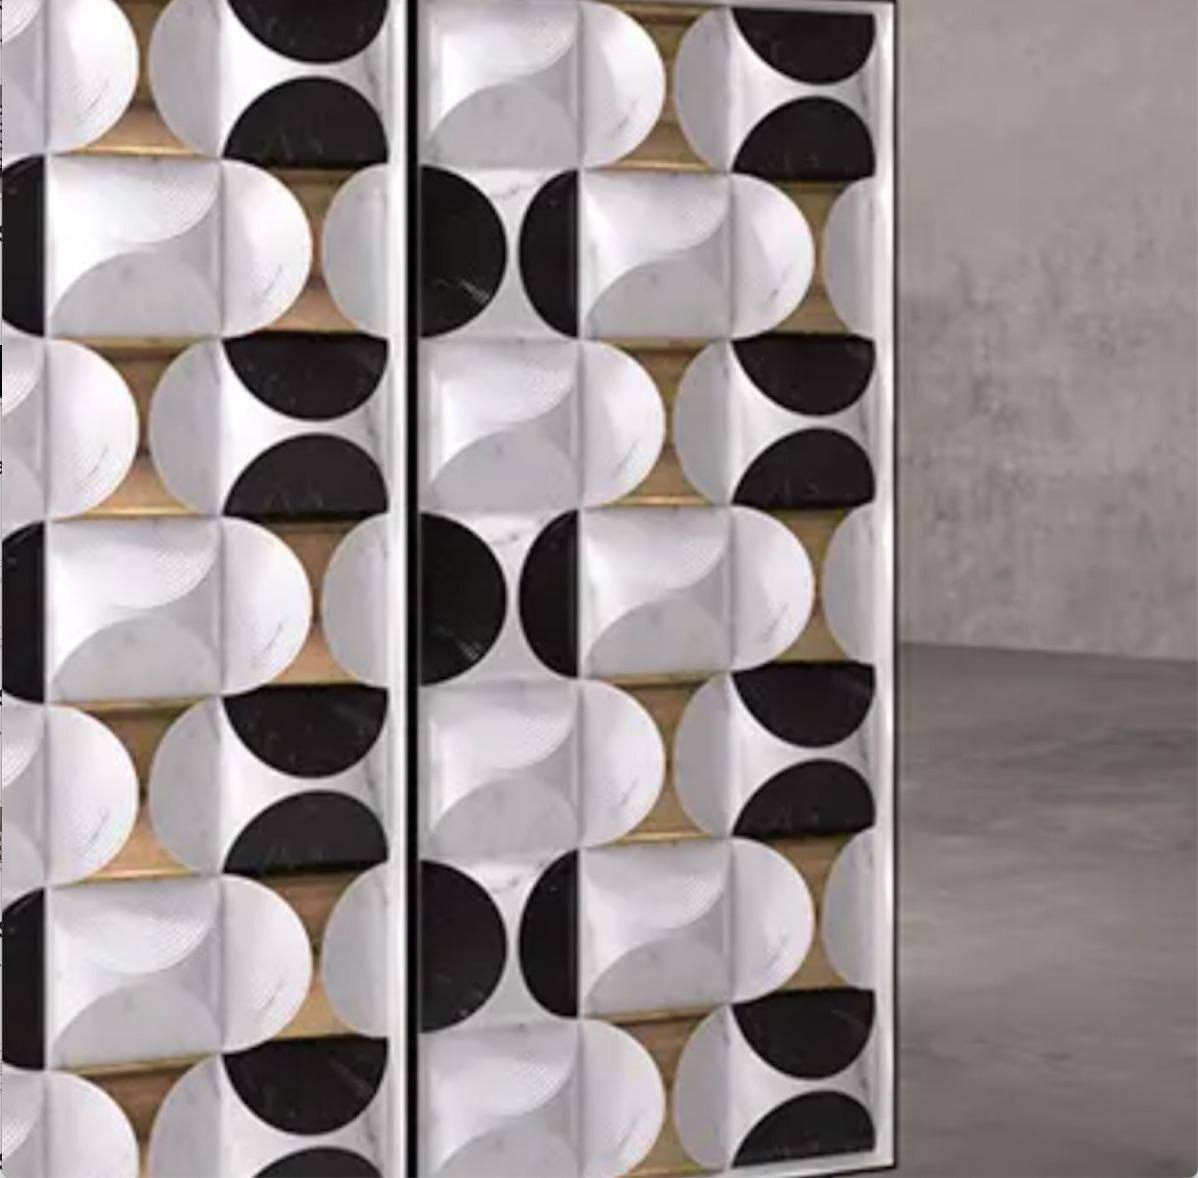 This contemporary cabinet is crafted in Italy in white calacatta marble and Nero Marquina marble with polished brass details all inspired by ancient art of origami. The combination of different materials that can be seen reproduce the effect of silk